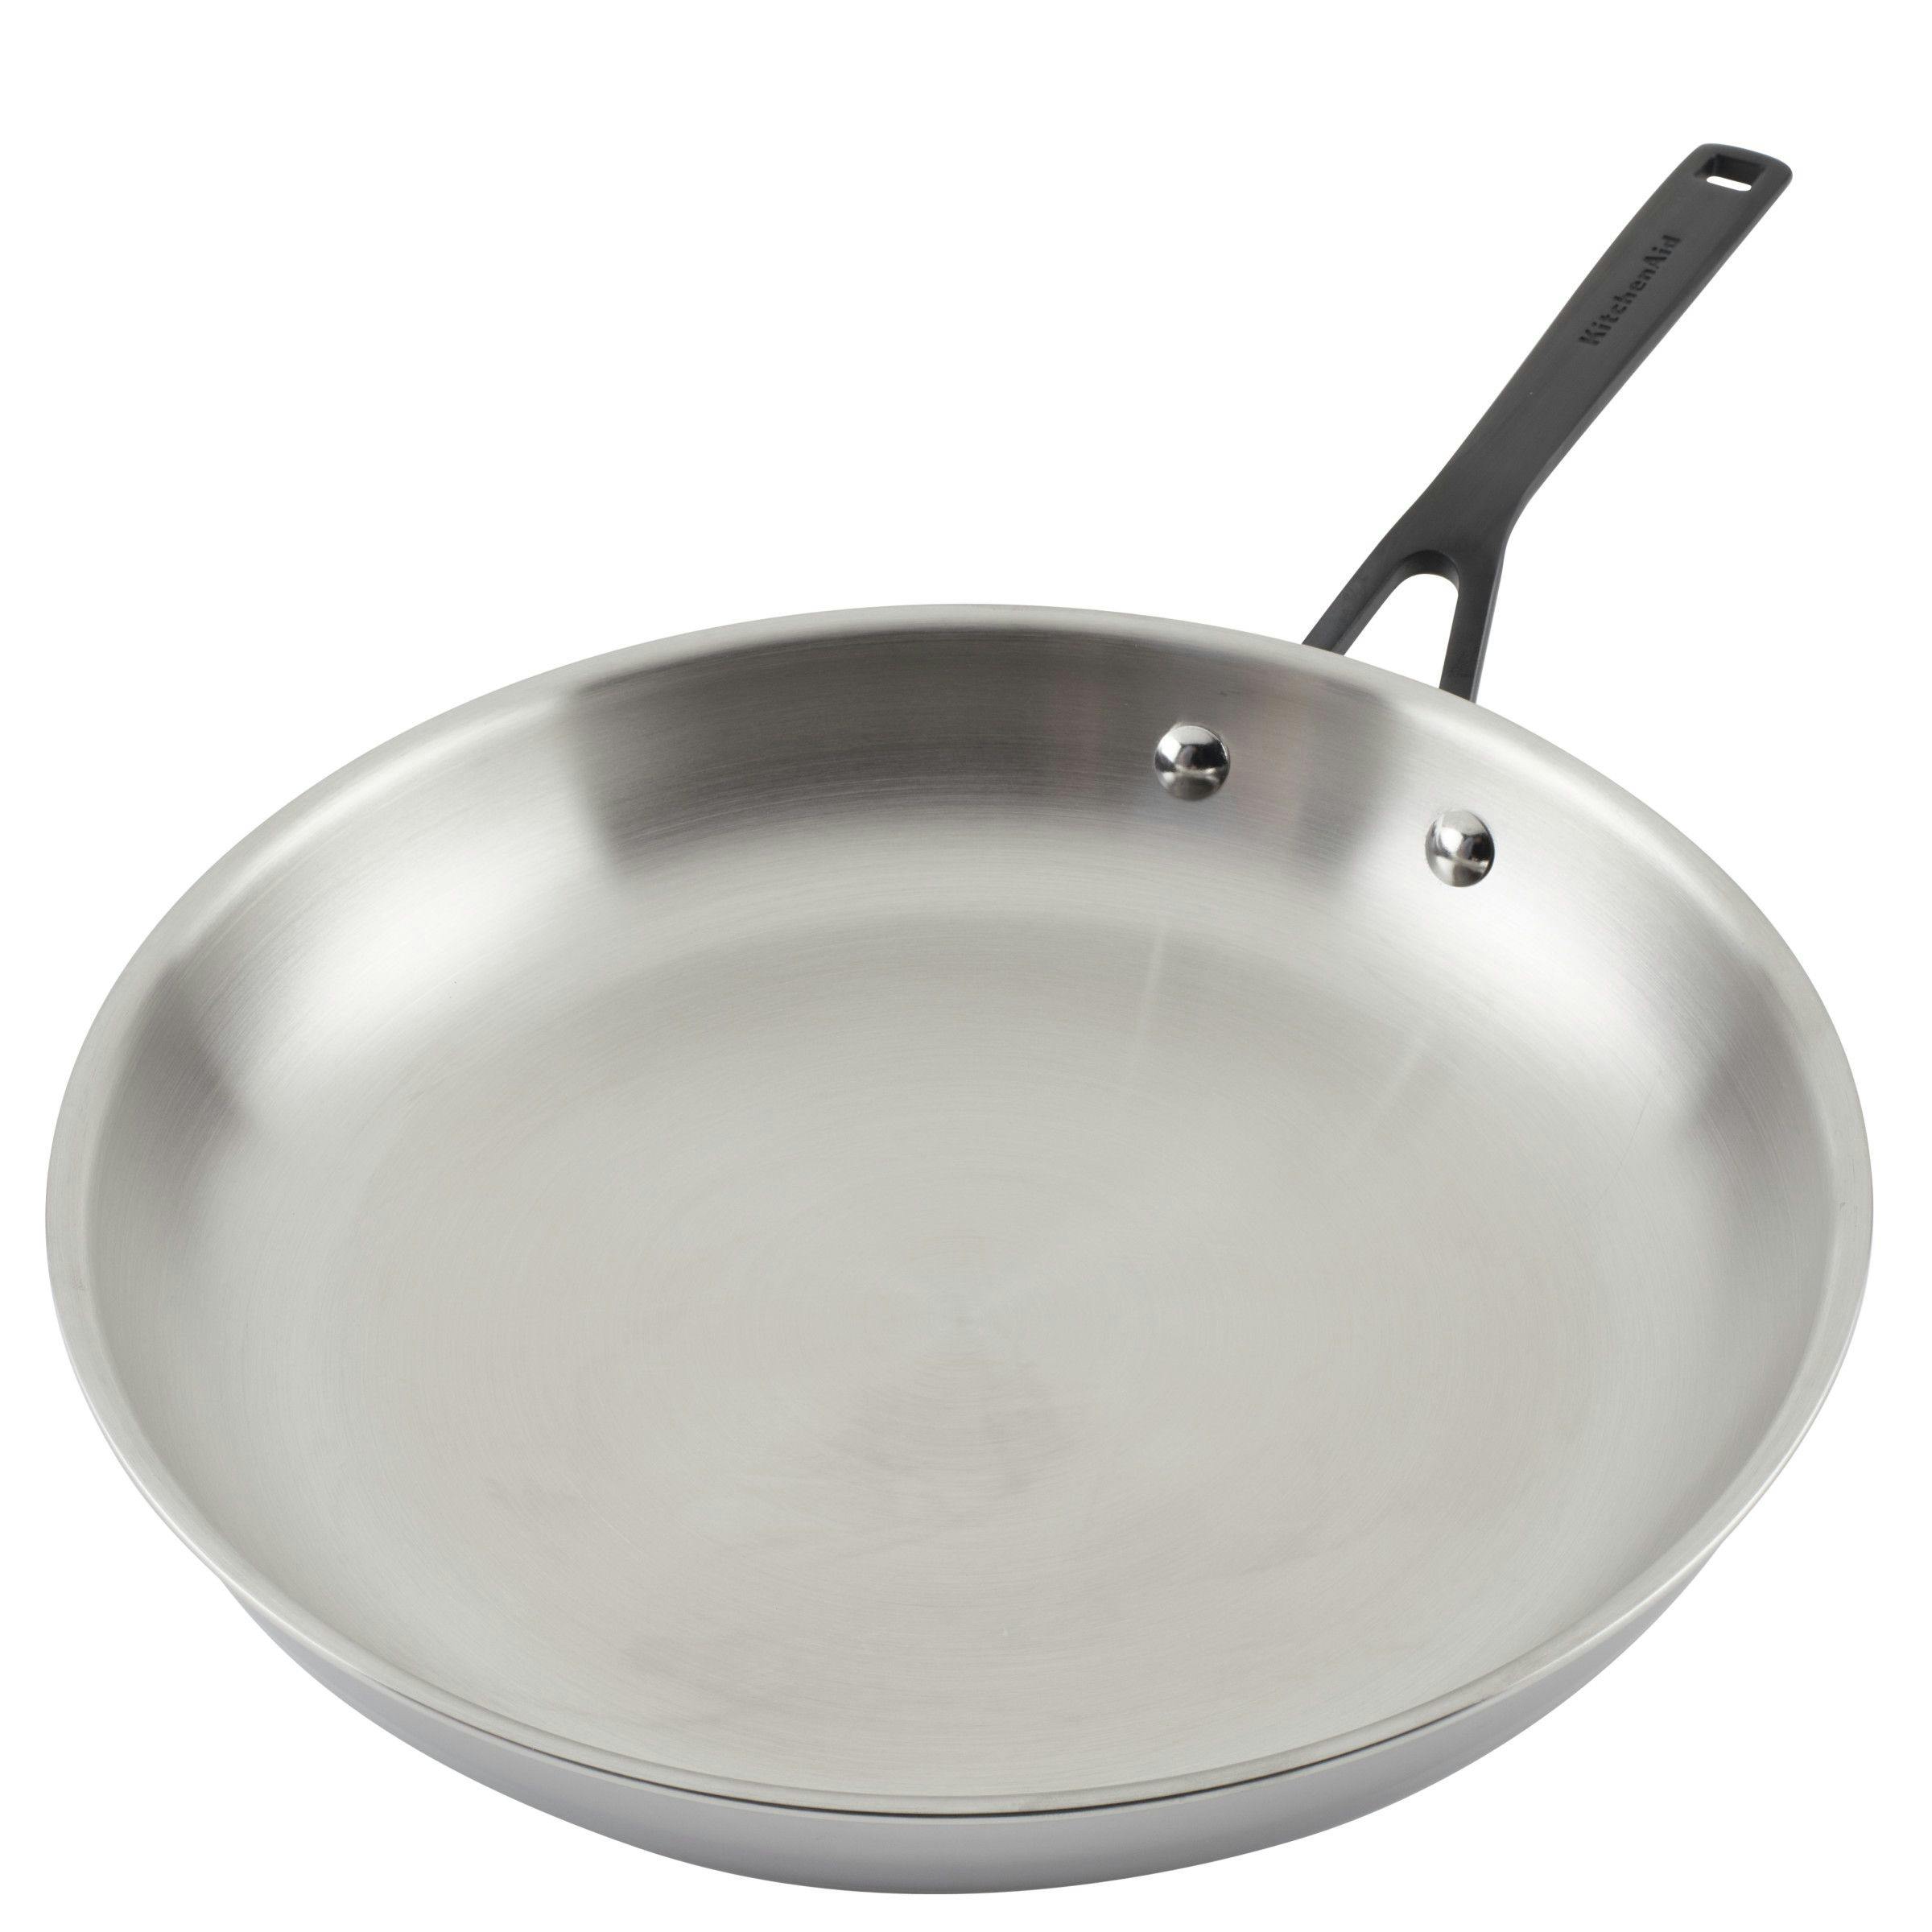 KitchenAid 5-Ply Clad Stainless Steel Induction Frying Pan, 12.25-Inch, Polished Stainless Steel